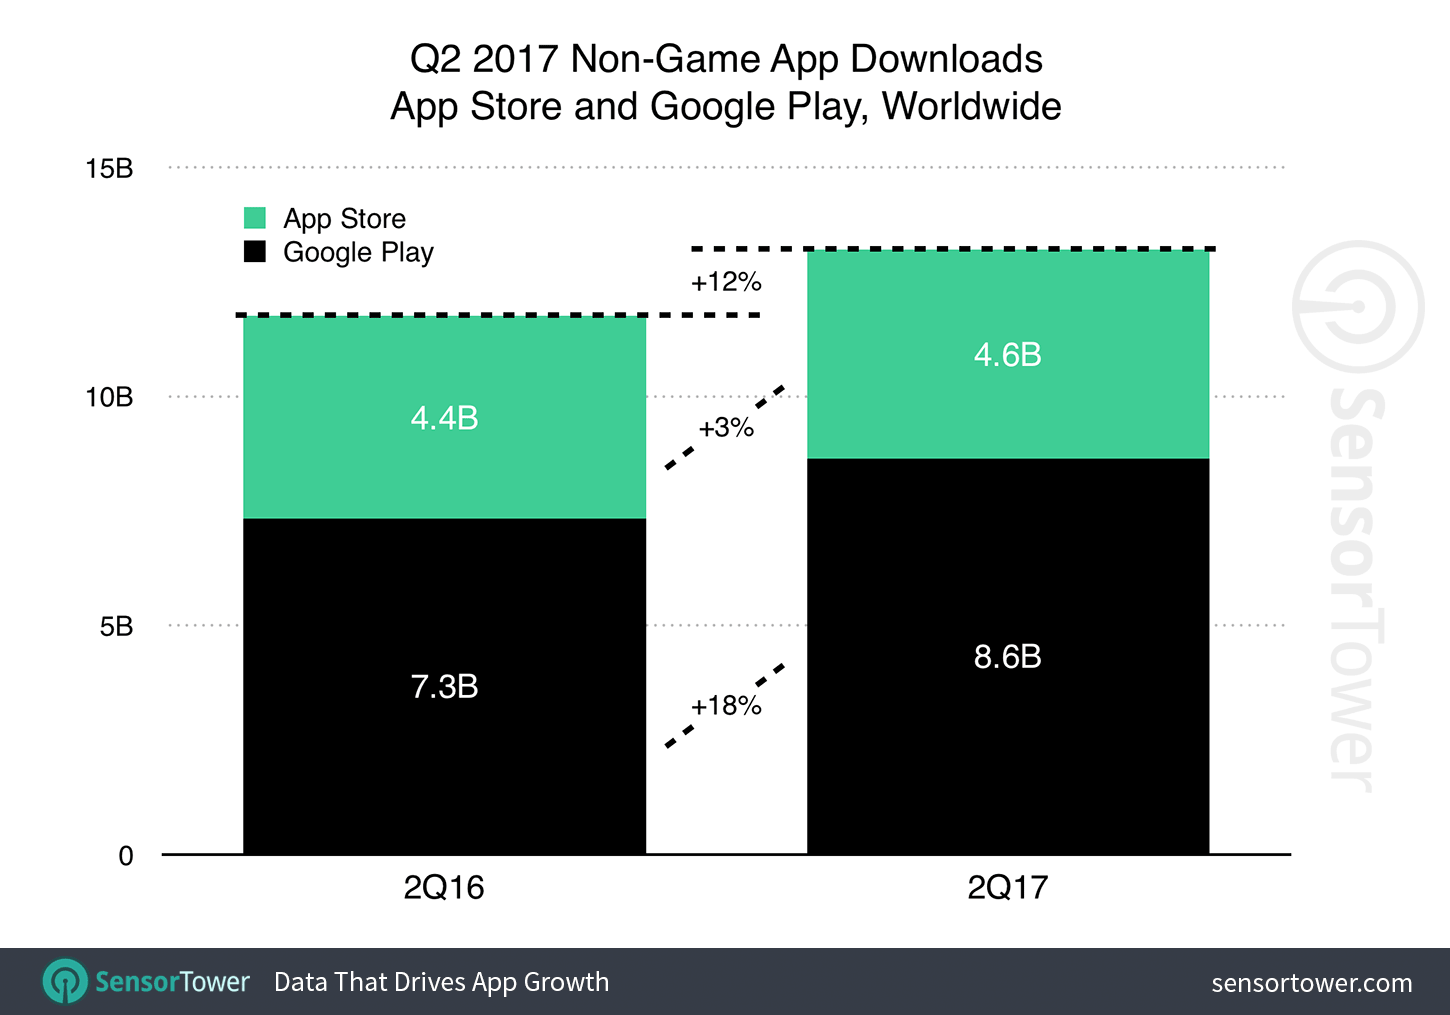 Q2 2017 Apps Worldwide Download Growth